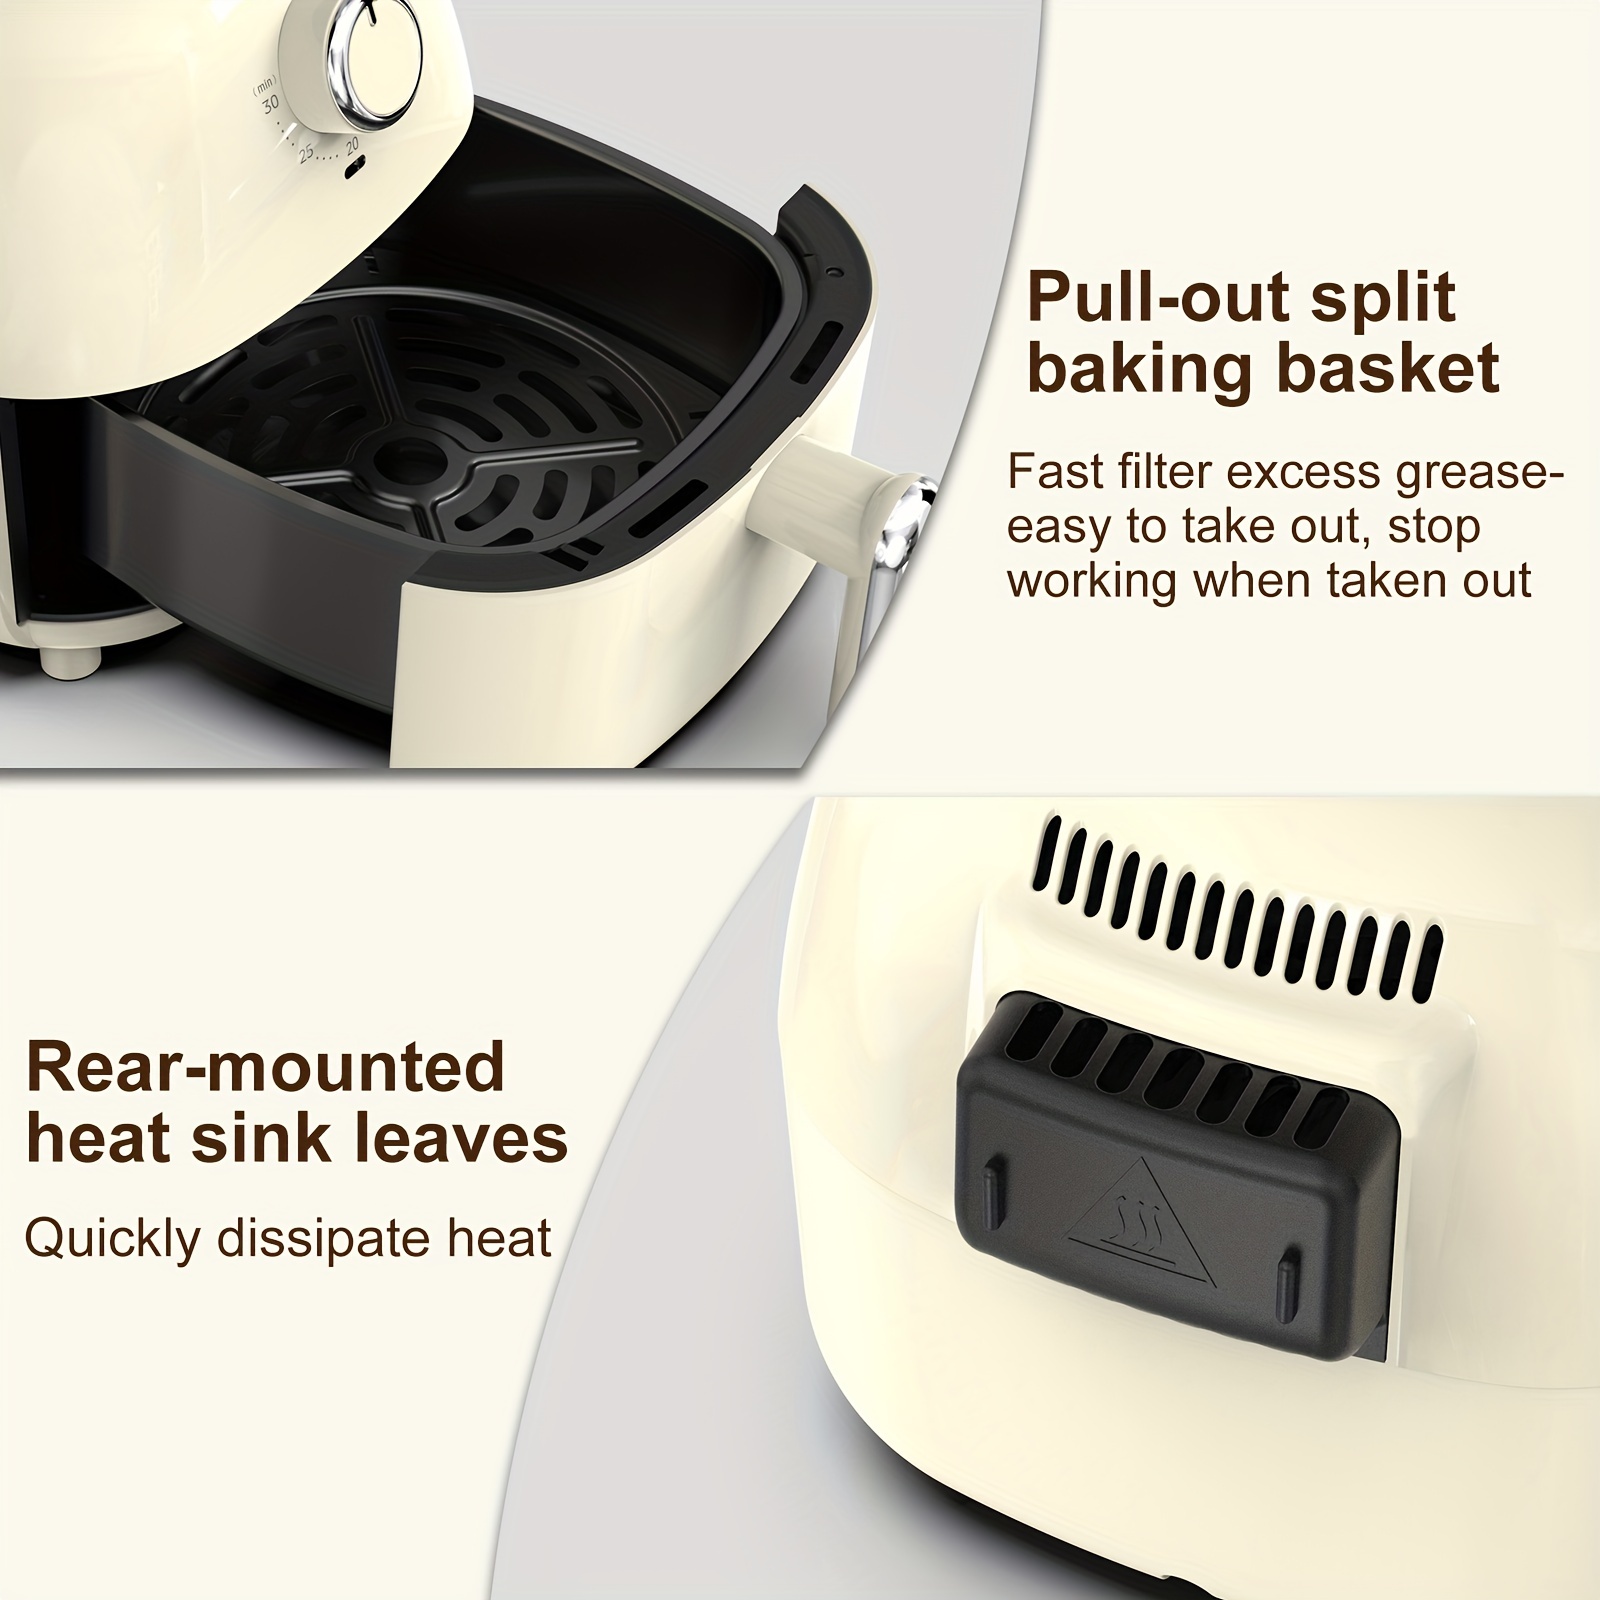 Air Fryer 5 Qt Fast And Convenient Meals, Up To 450°F, Quiet Operation, 85%  Less Oil, 10 Customizable Functions In 1, Compact, Dishwasher Safe, Grey f